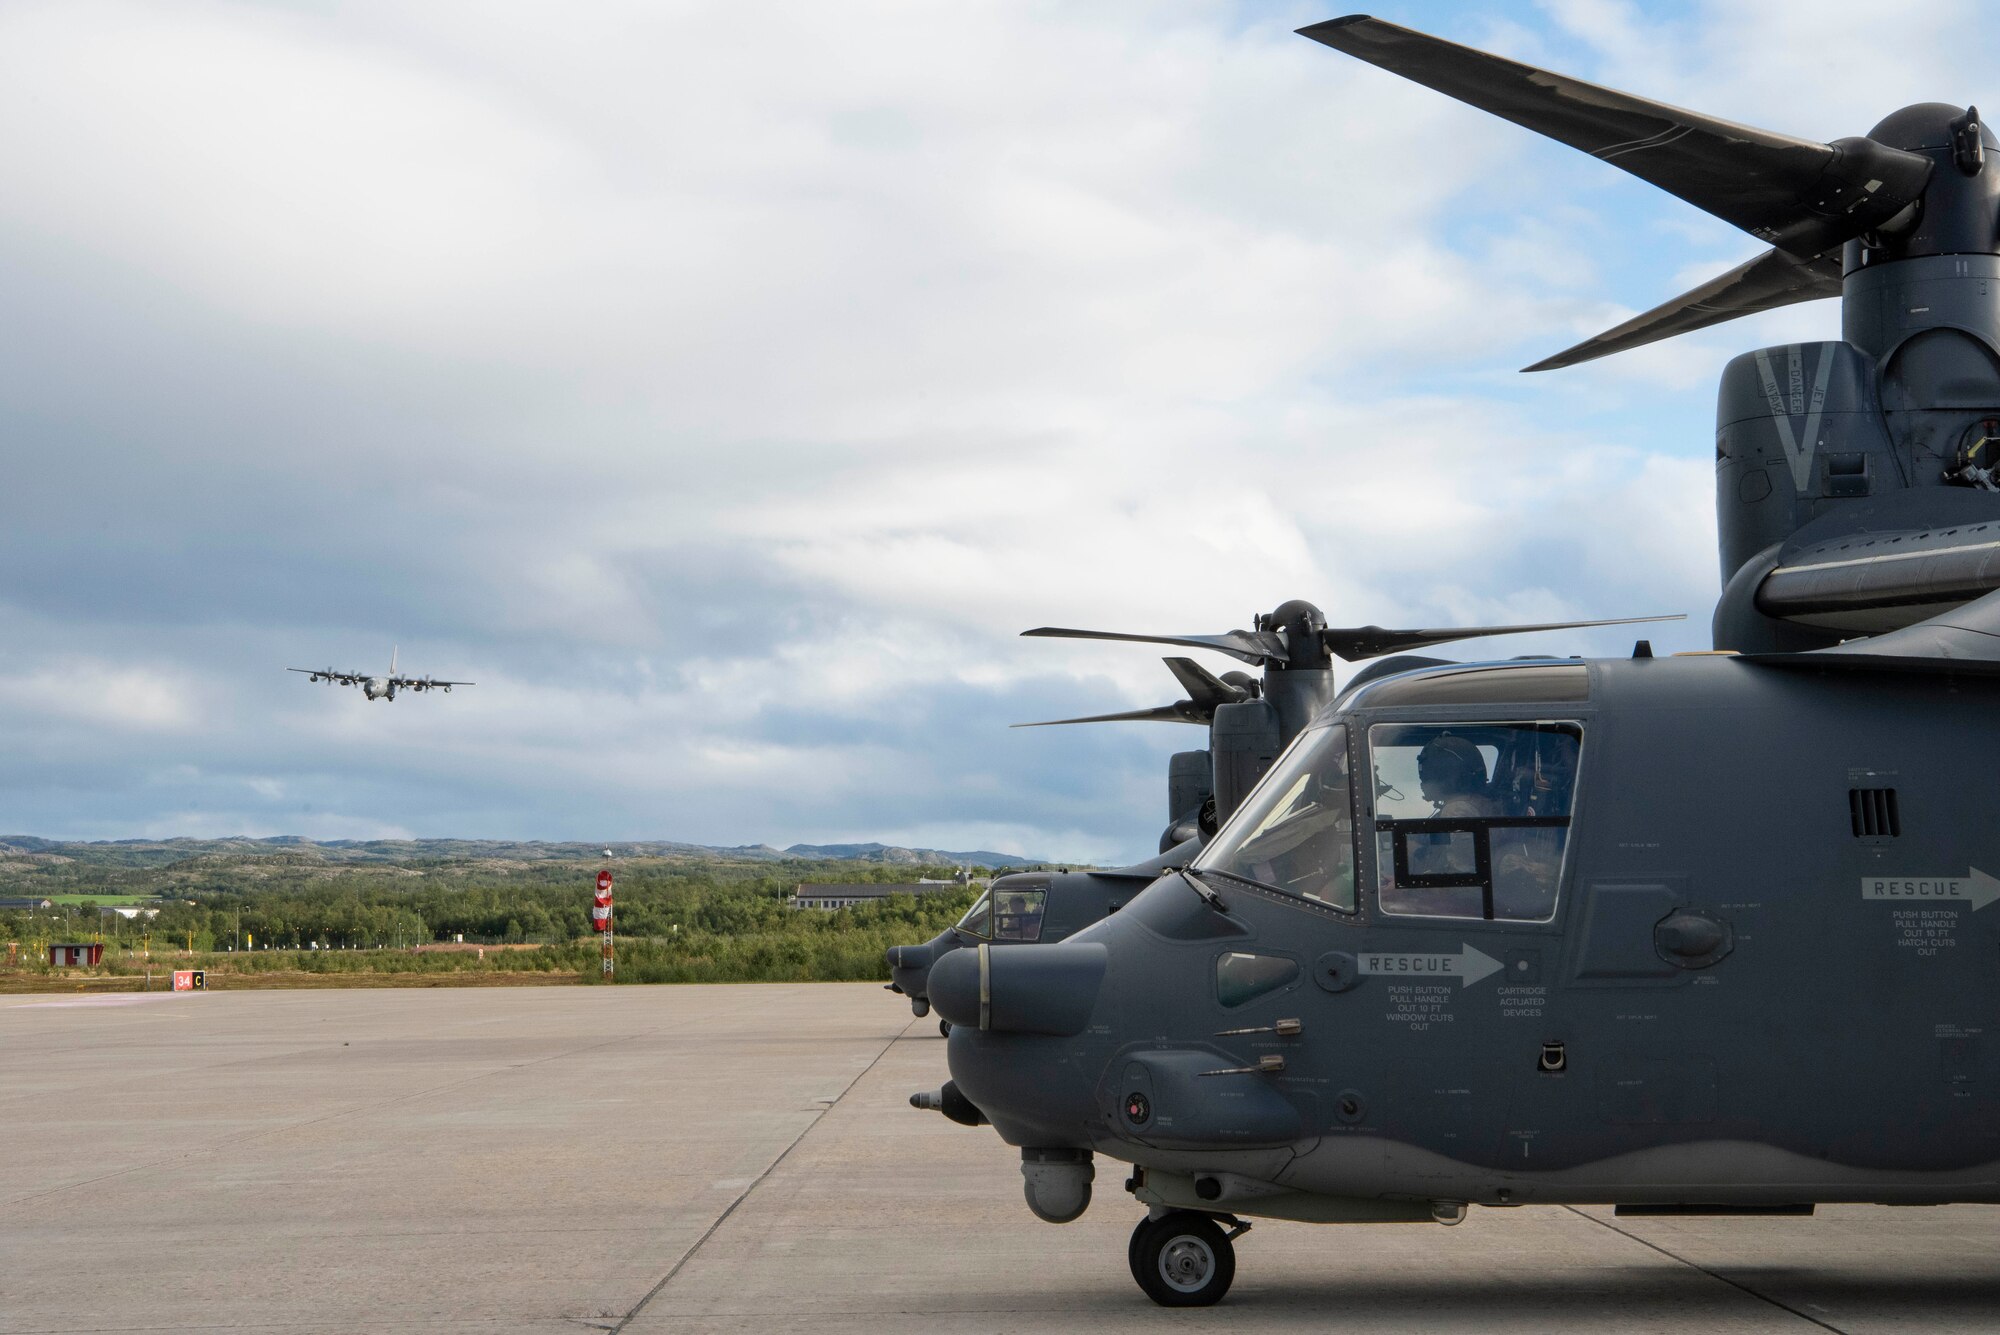 Two CV-22B Ospreys sit parked on a flight line as an MC-130J Commando II, all based out of RAF Mildenhall, U.K., prepares to land during a training exercise near Bodø, Norway, August 27, 2020. In-tegration with the Norwegian Air Force allowed the 352d Special Operations Wing to enhance and strengthen bonds with our partner nation and further secure the strategic high-north region. The exercise provided training for 352d Special Operations Wing members on capabilities such as personnel recov-ery, forward area refueling point, aerial refueling, maritime craft delivery system, and fast rope training. (U.S. Air Force photo by Staff Sgt. Michael Washburn)